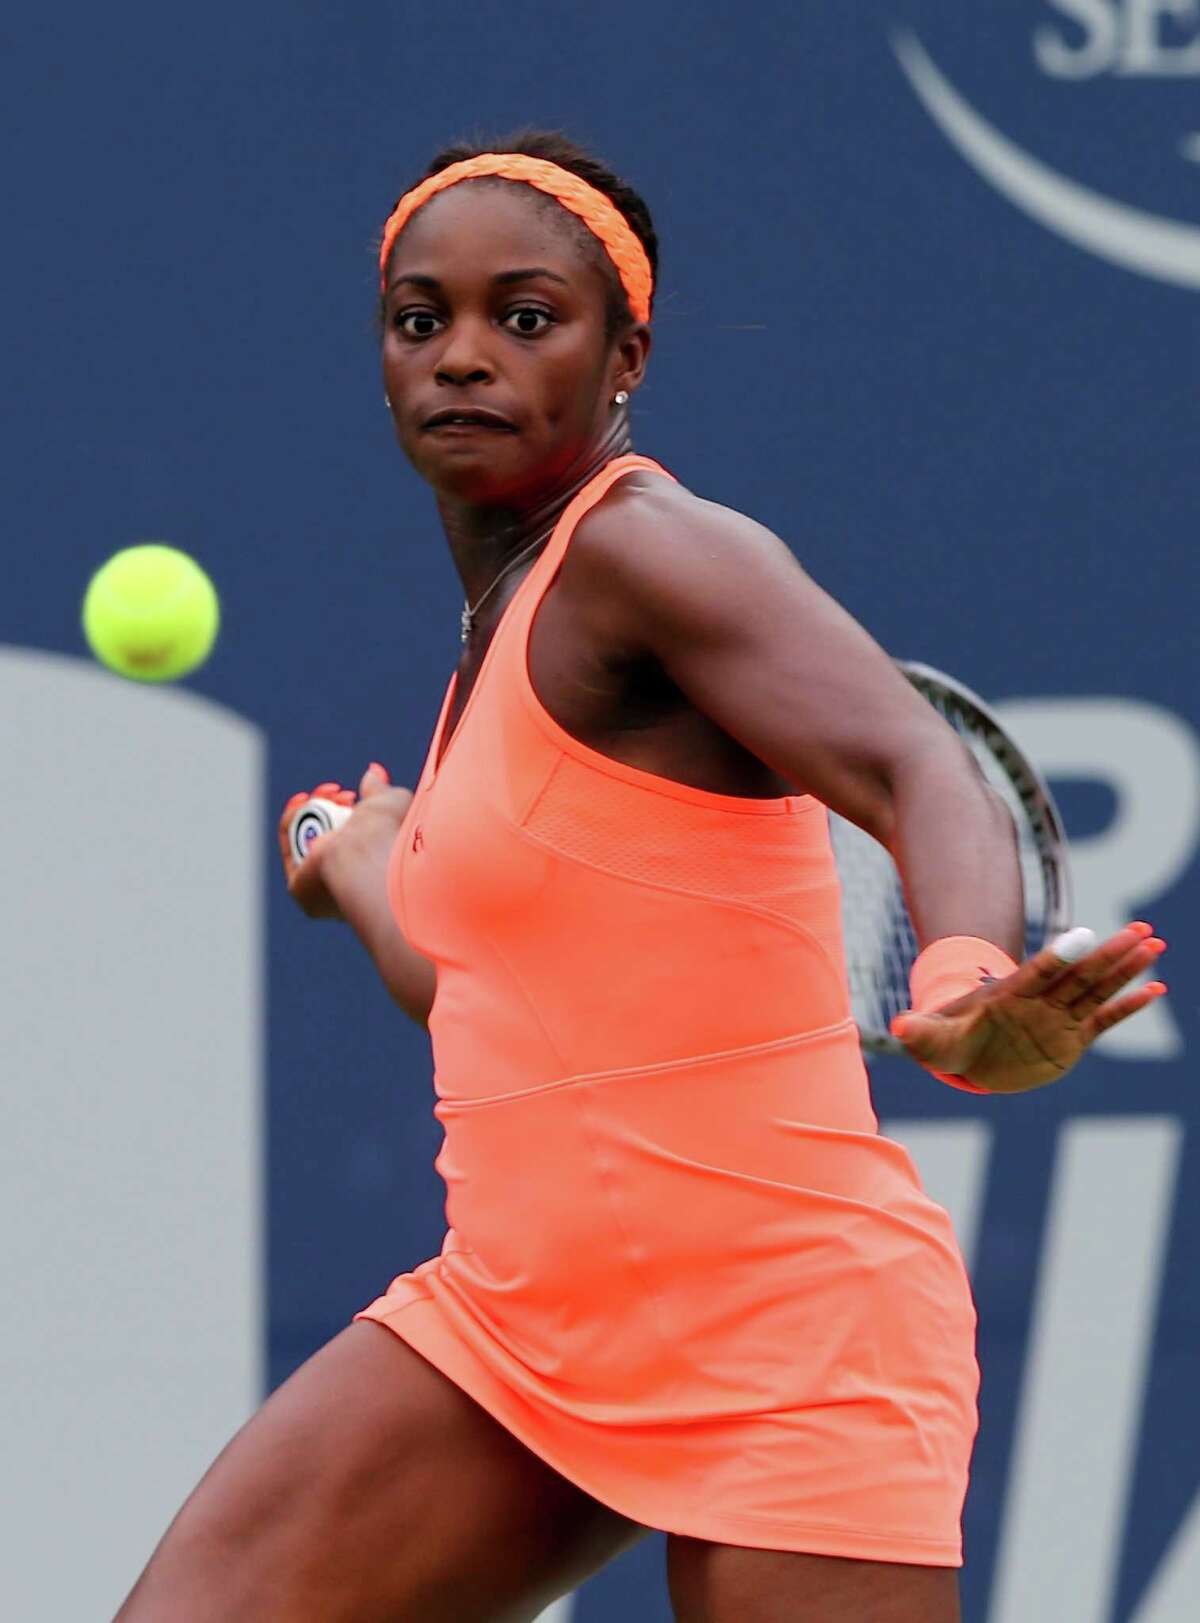 NEW HAVEN, CT - AUGUST 19: Sloane Stephens of the USA returns a shot to Anna Schmiedlova of Slovakia during Day Two of the New Haven Open at the Connecticut Tennis Center at Yale on August 19, 2013 in New Haven, Connecticut.